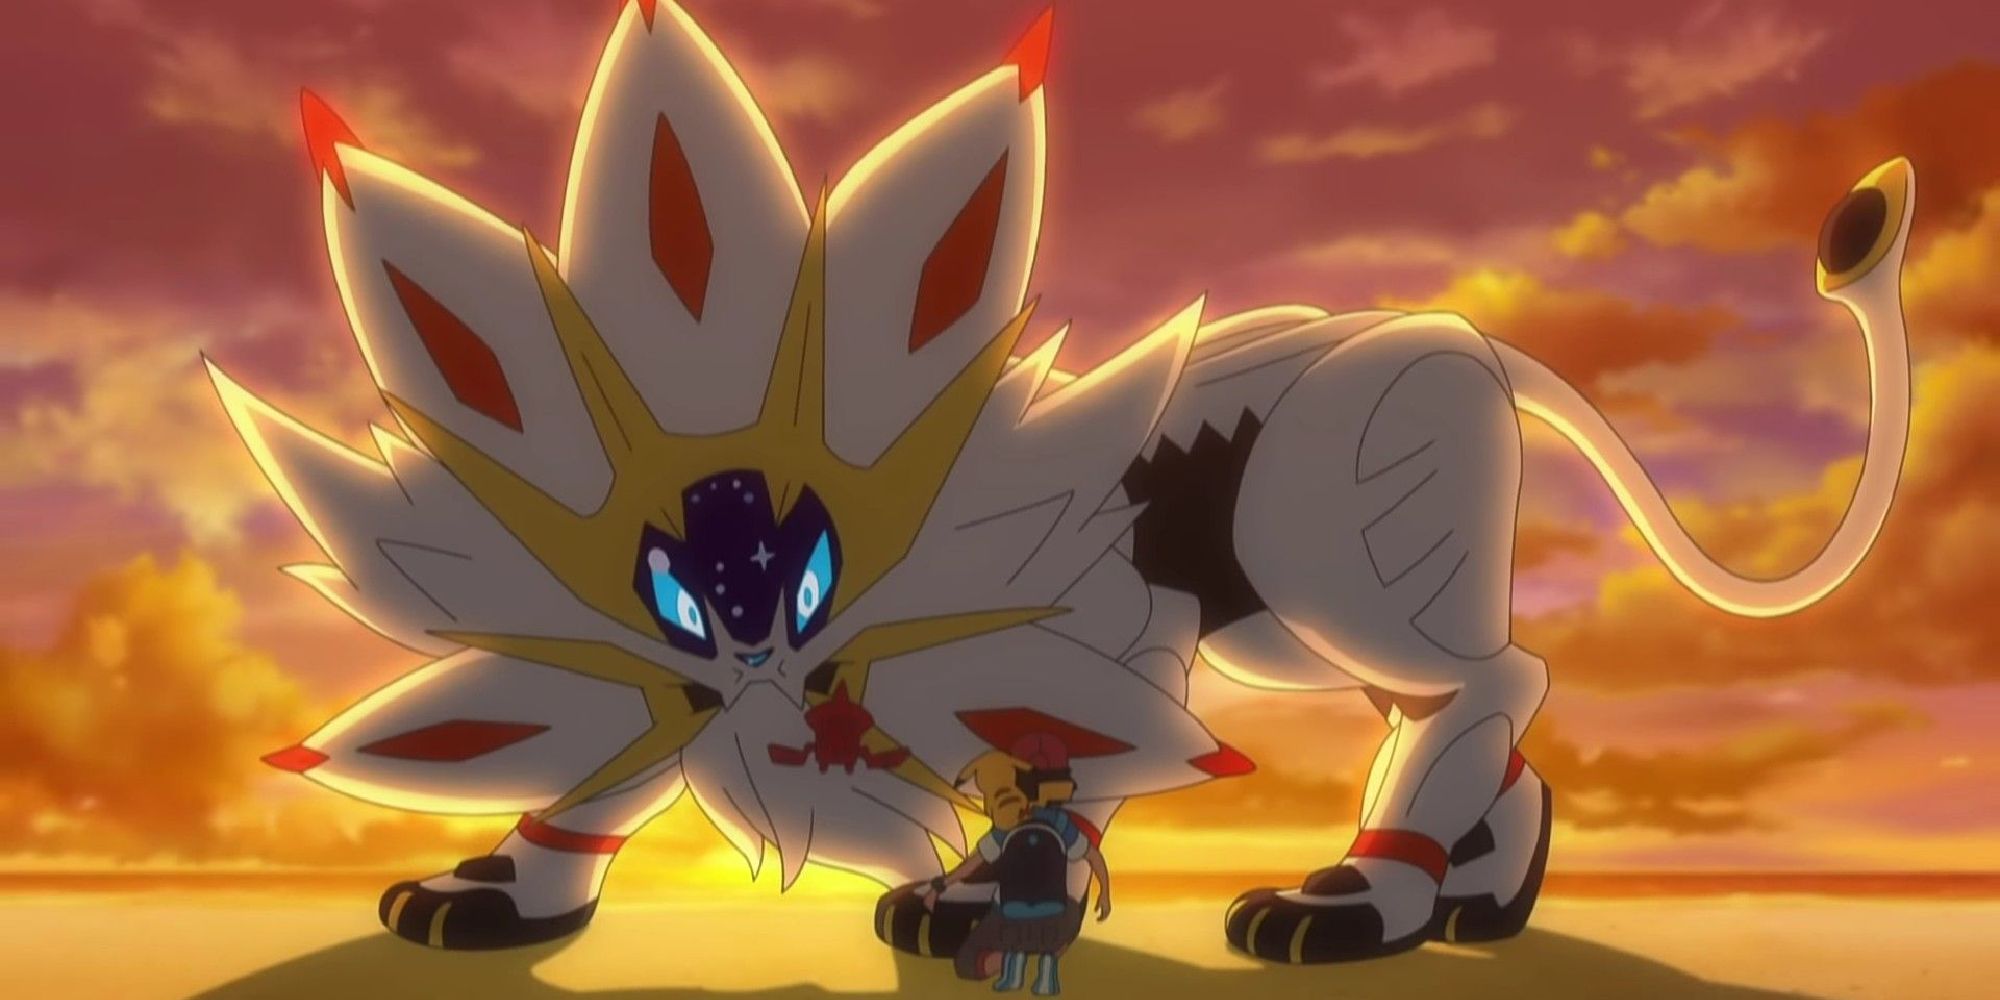 Ash and Pikachu approaching Solgaleo during a sunset in the anime